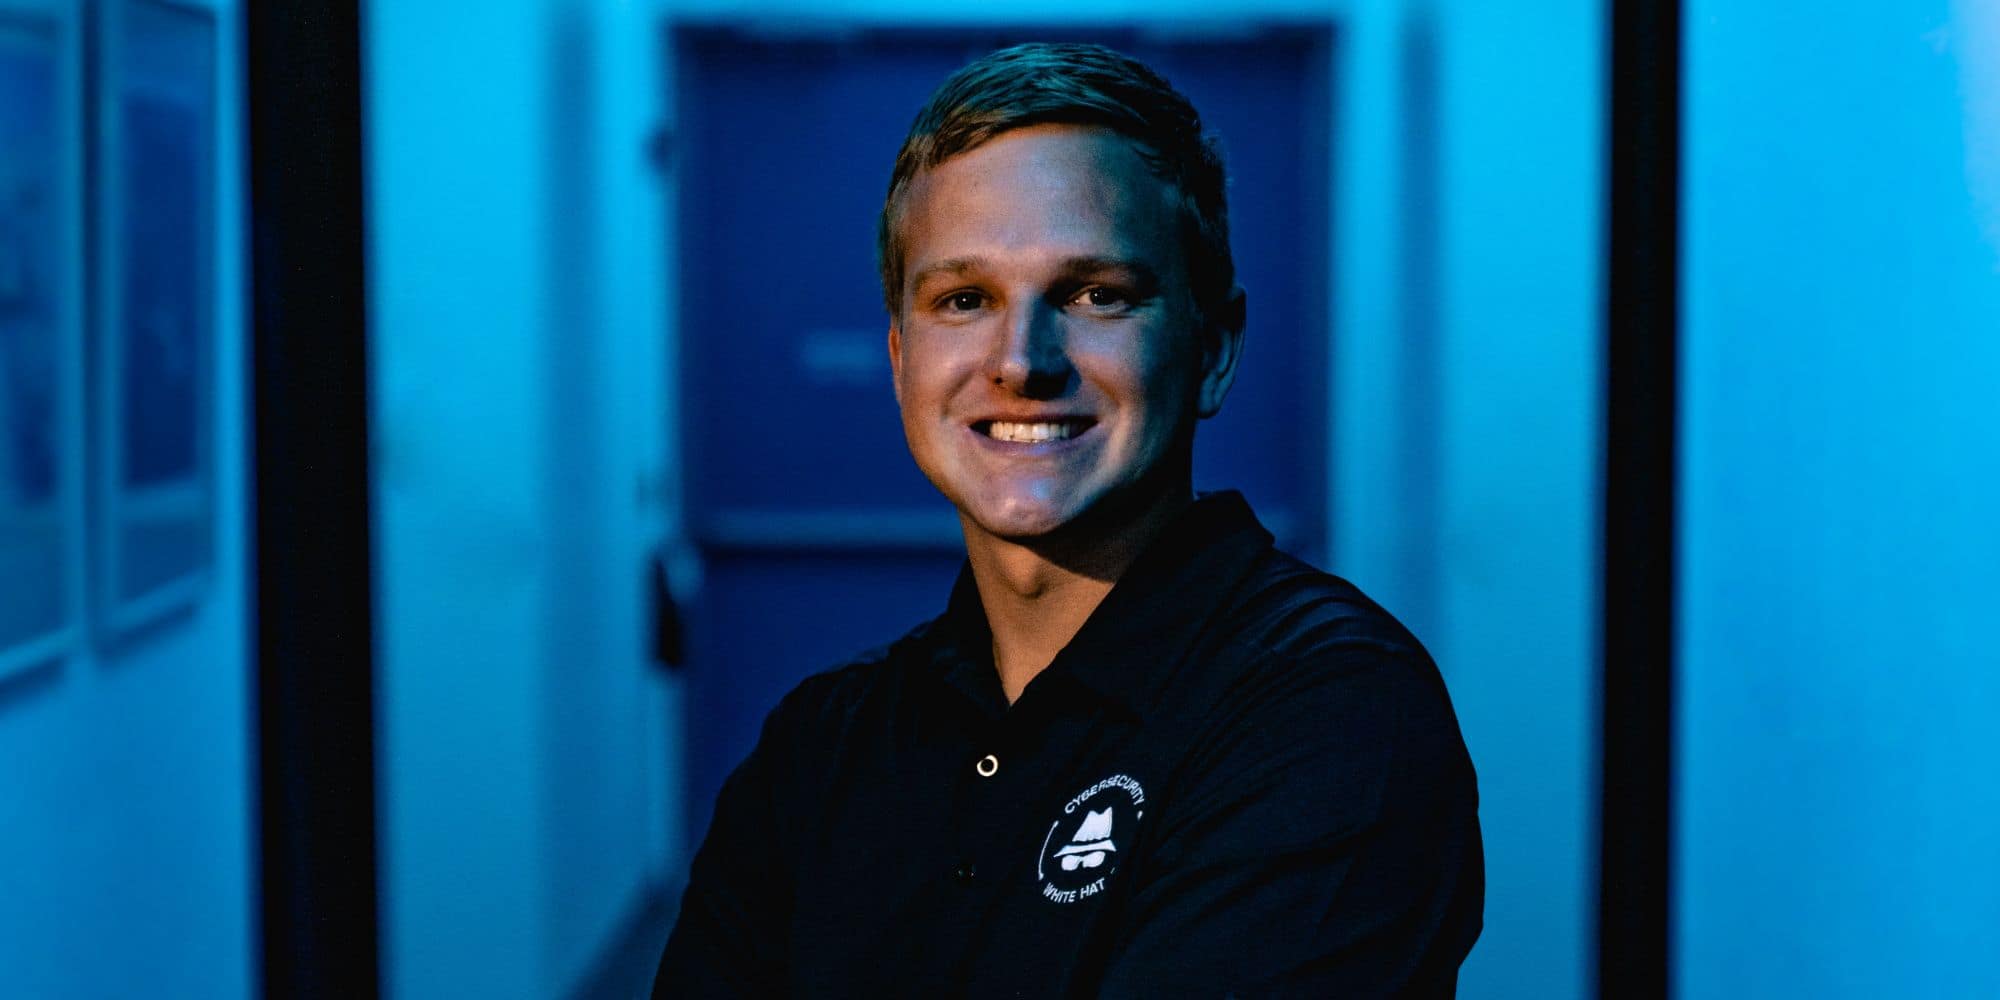 Alan Tomaszycki graduated from our Prescott Campus in 2019 with a double major in Cyber Intelligence and Security and Aeronautics with a helicopter flight minor.